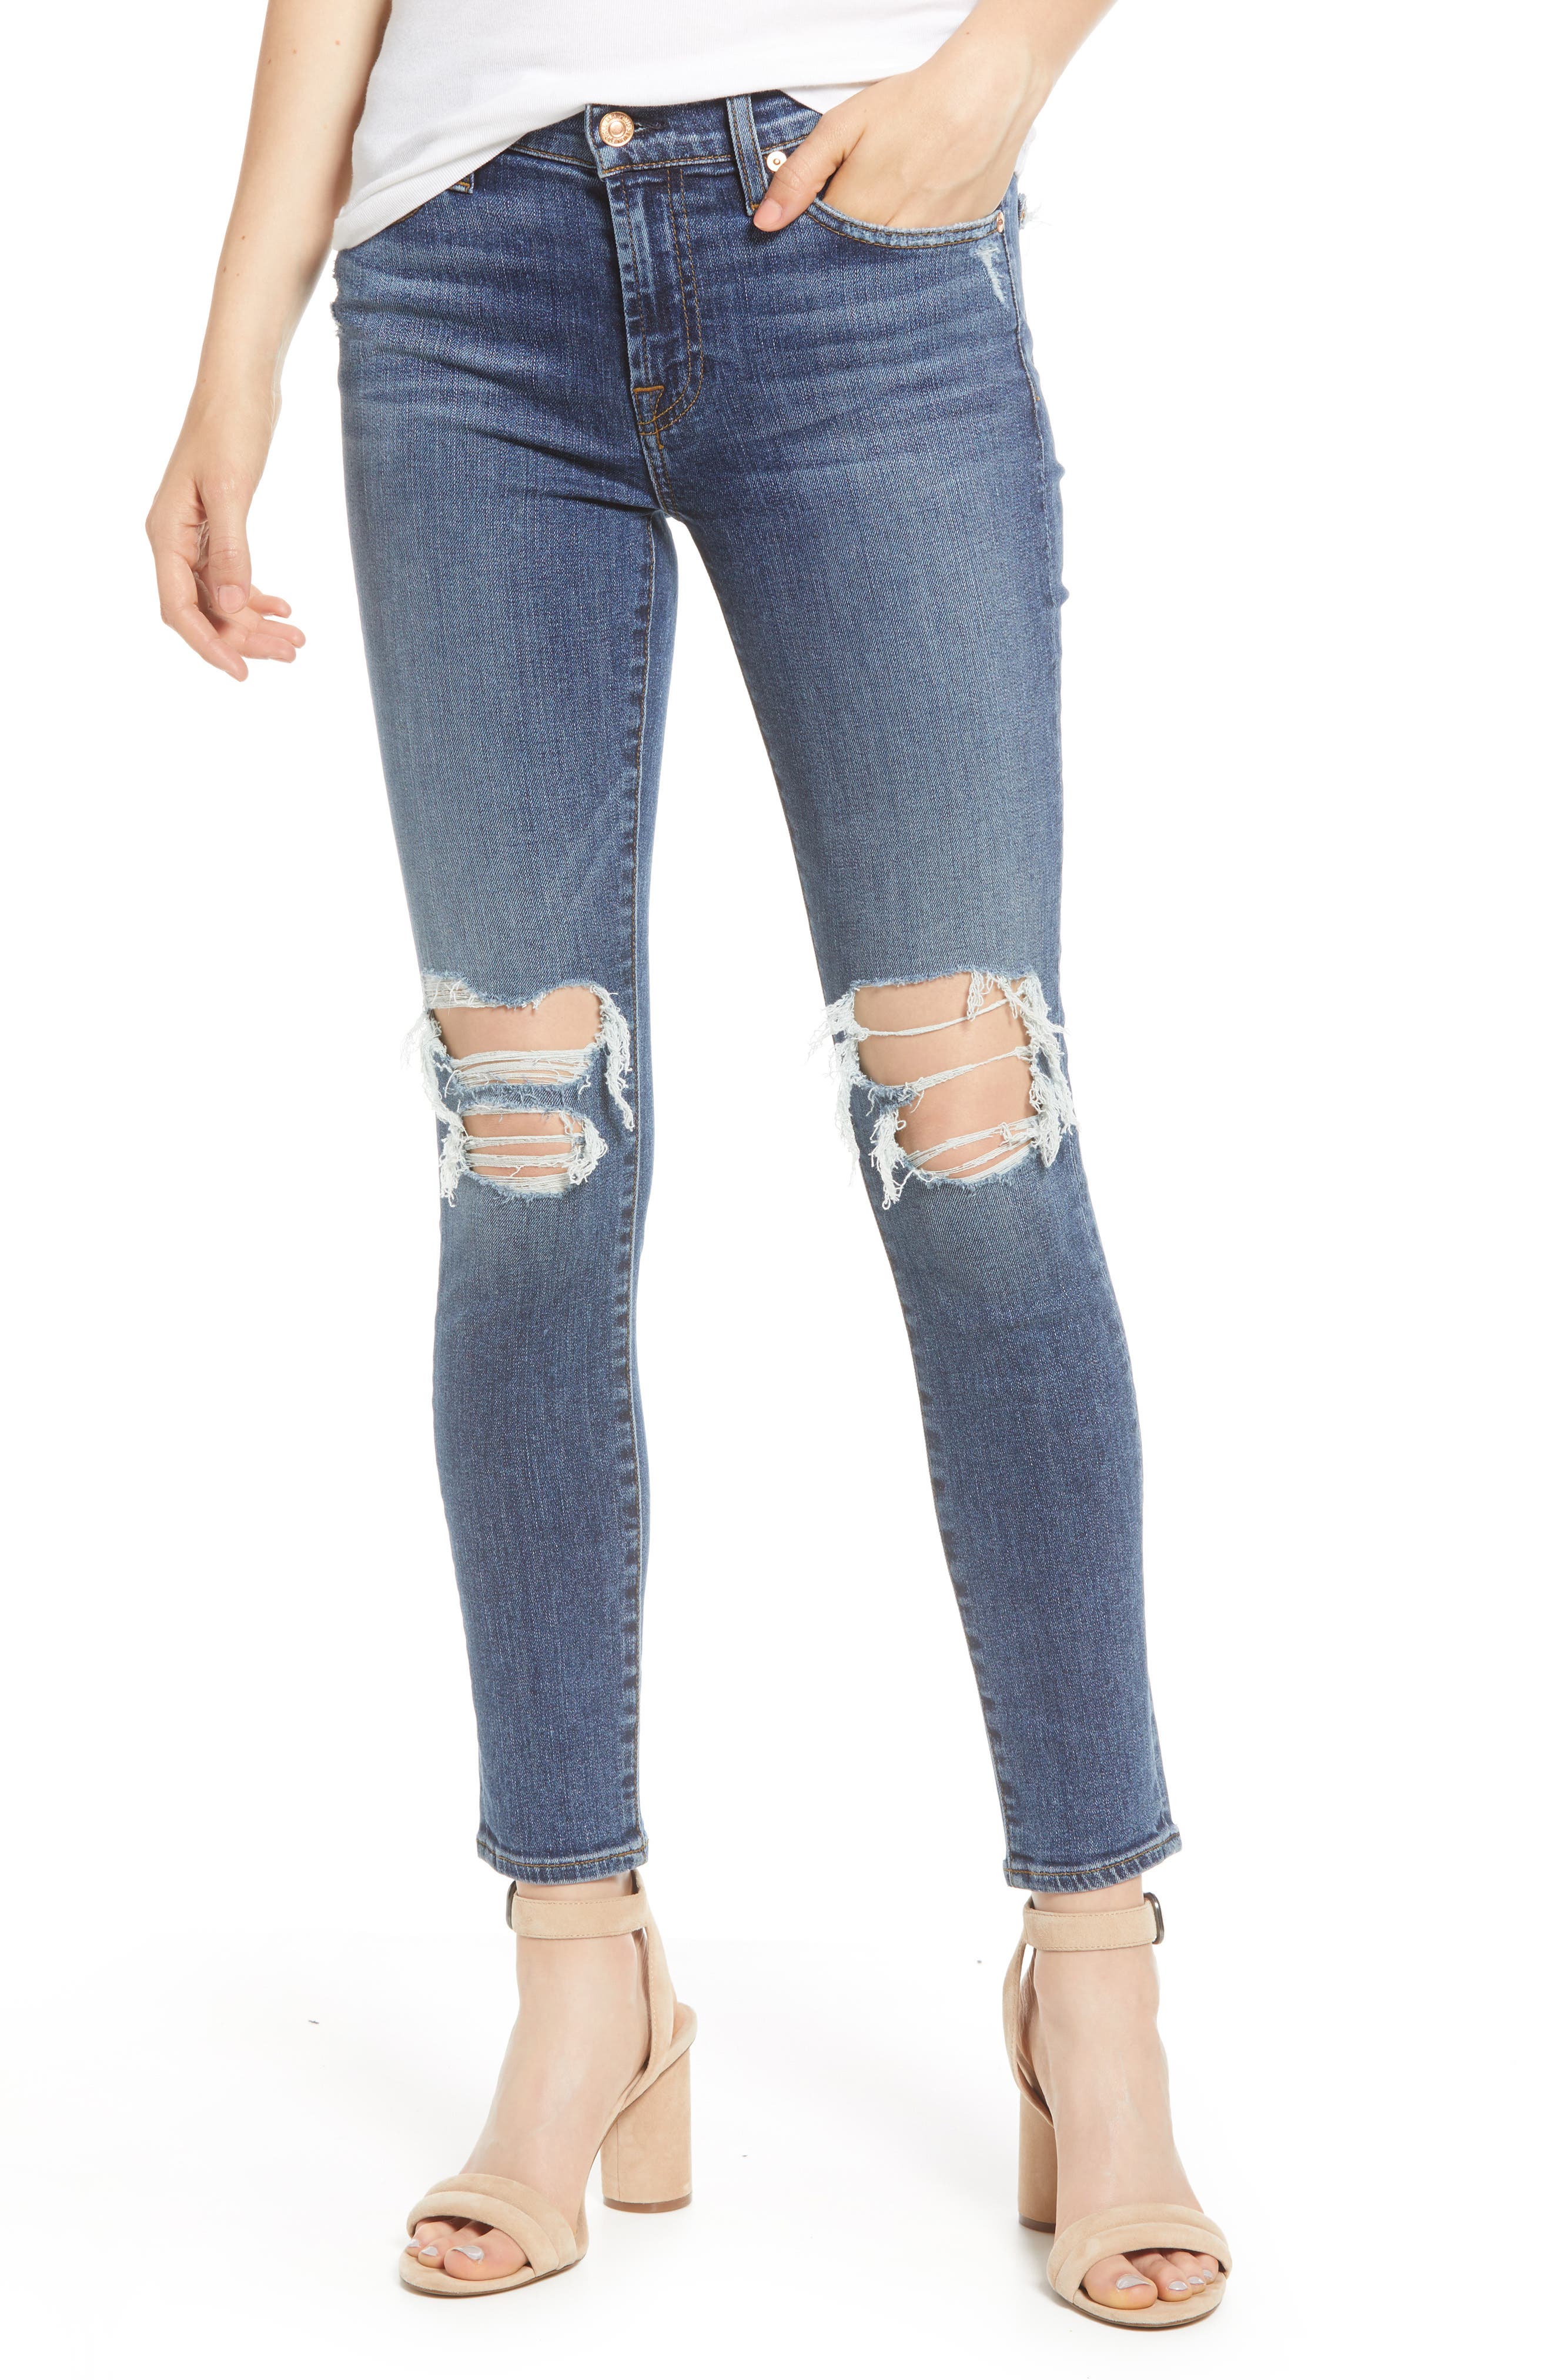 7 for all mankind destroyed jeans